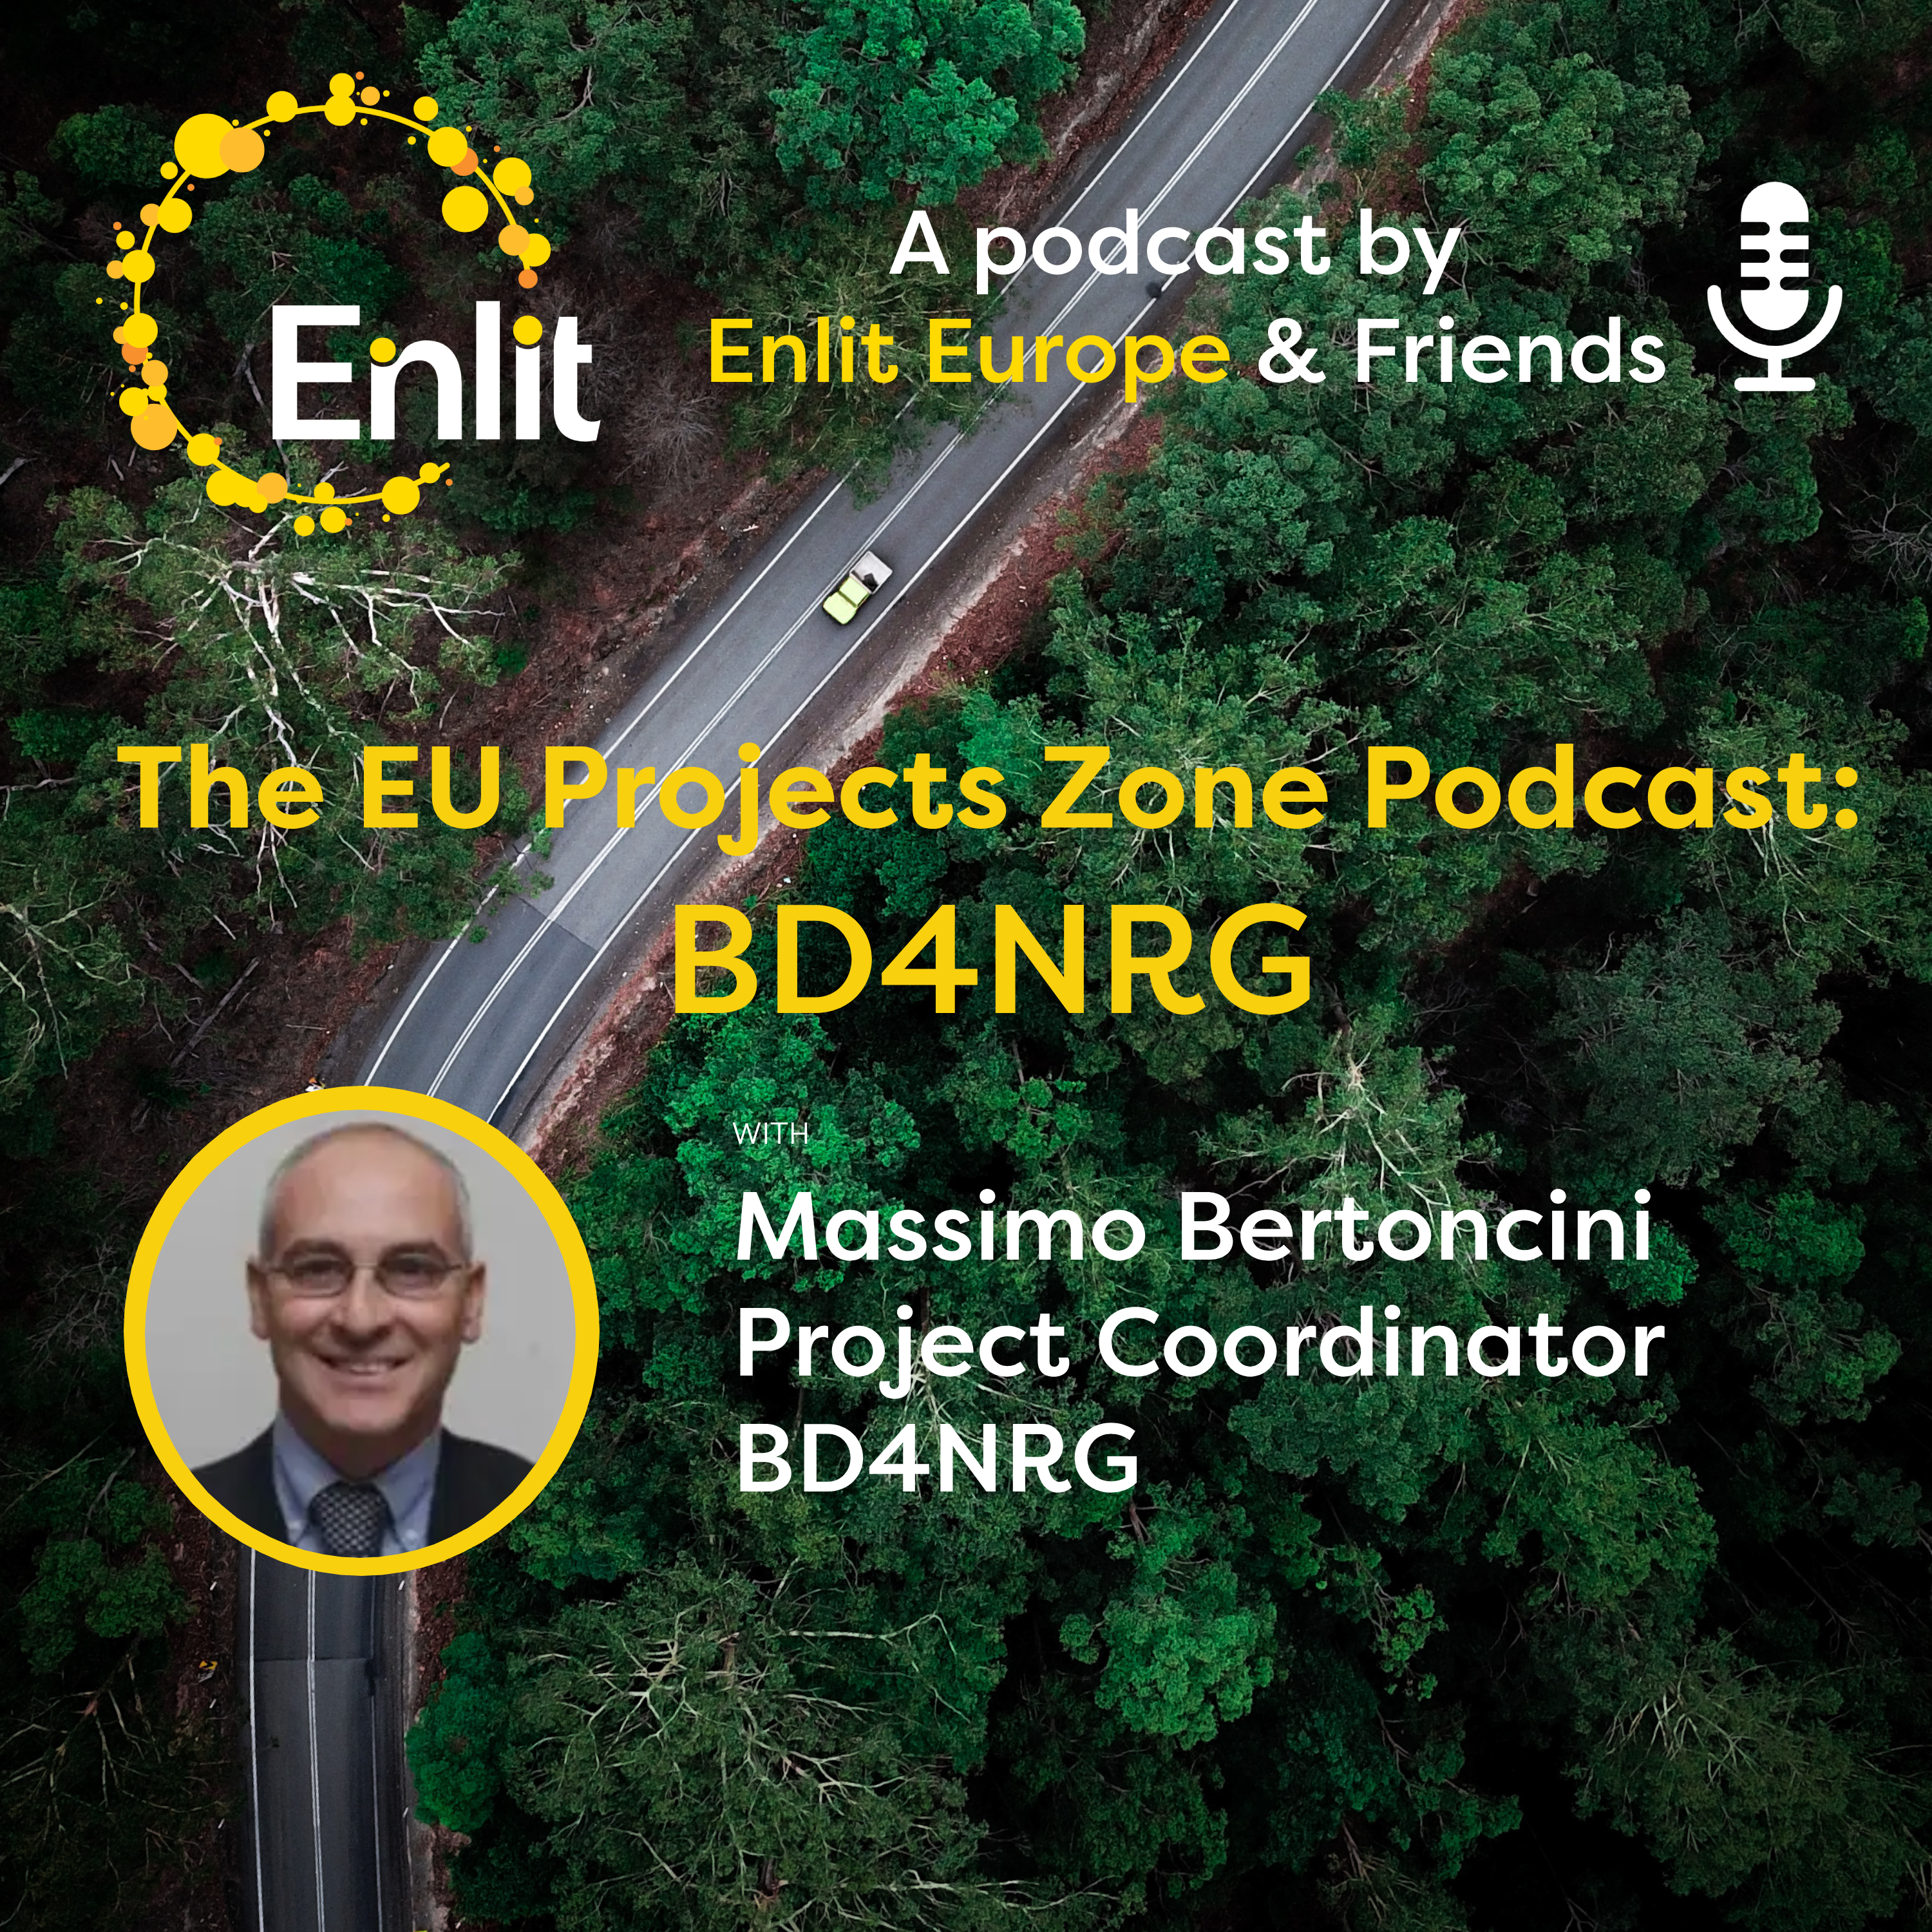 The EU Projects Zone Podcast: BD4NRG with Massimo Bertoncini